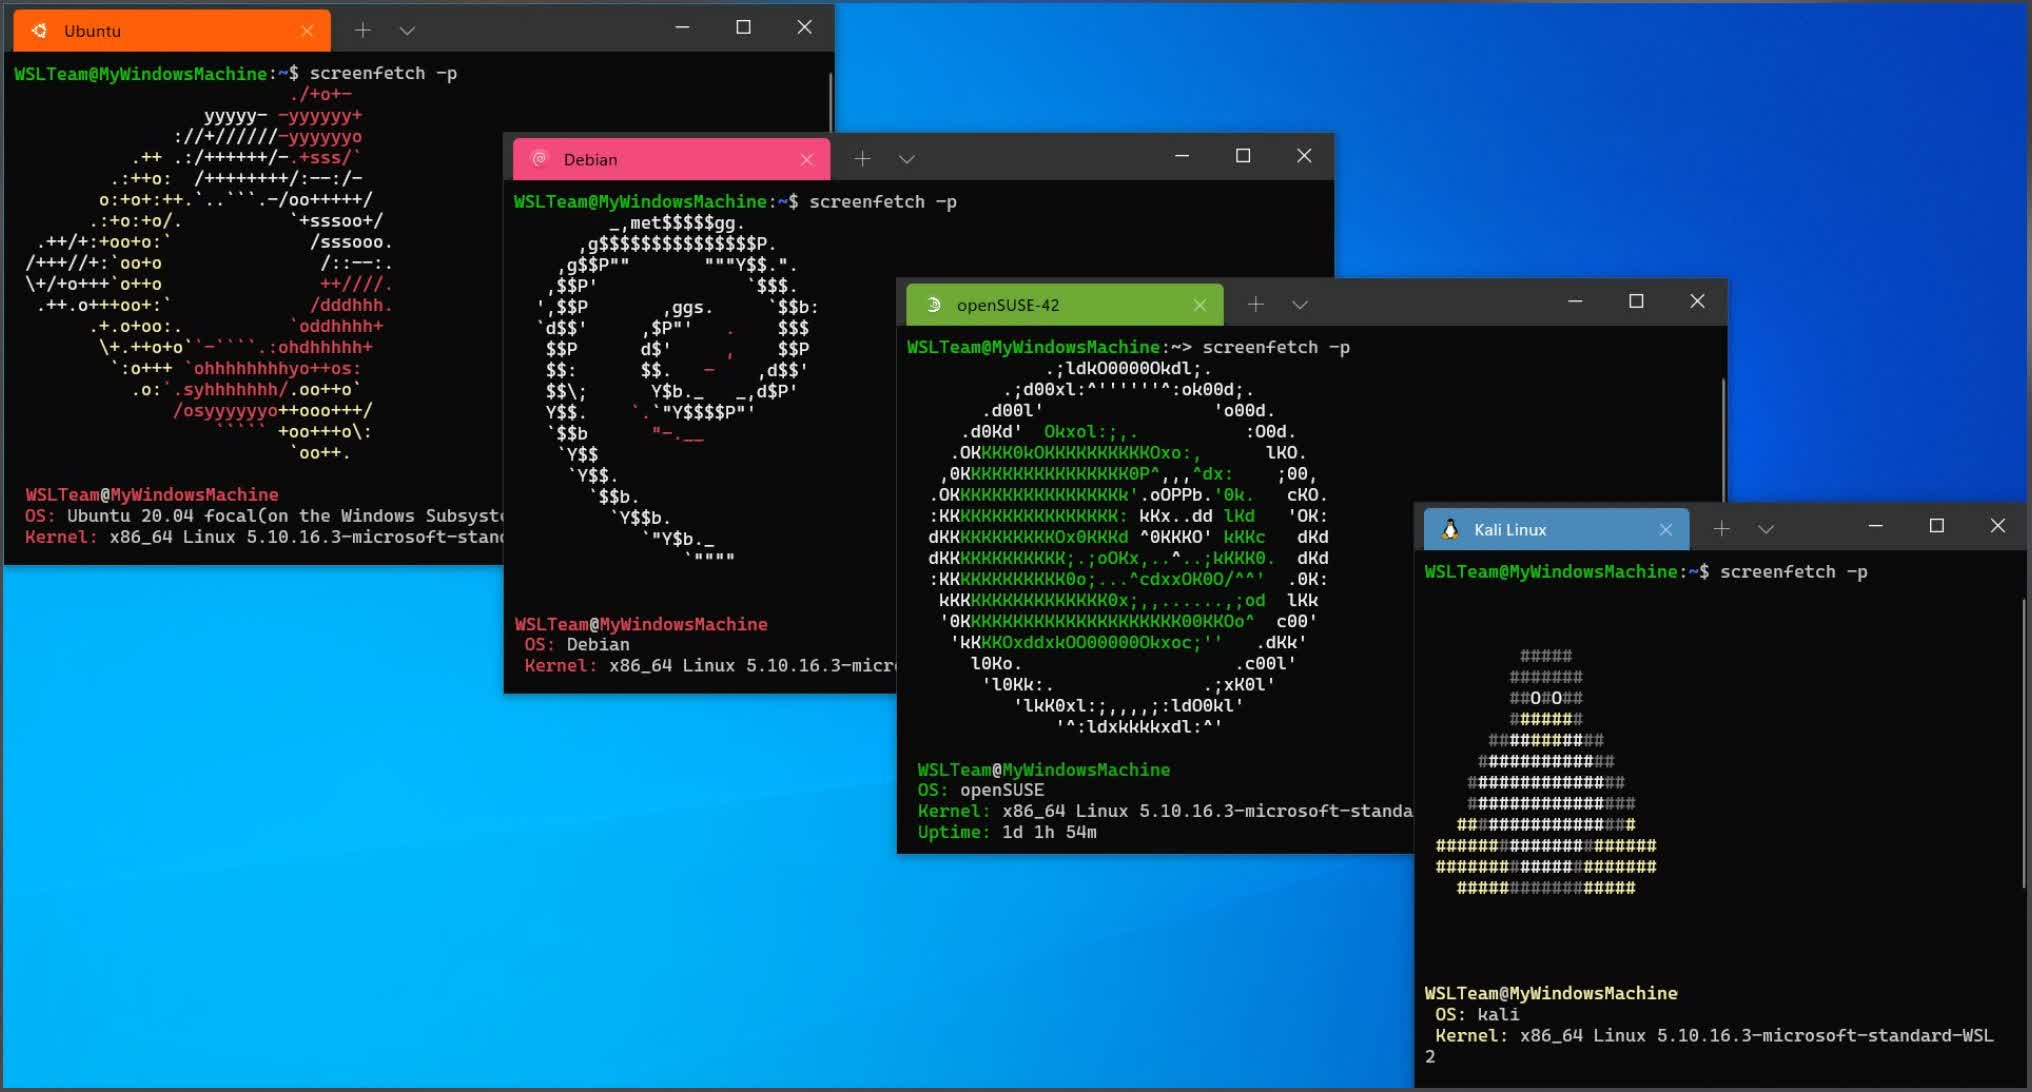 Microsoft's Windows Subsystem for Linux is now available as a Microsoft Store app